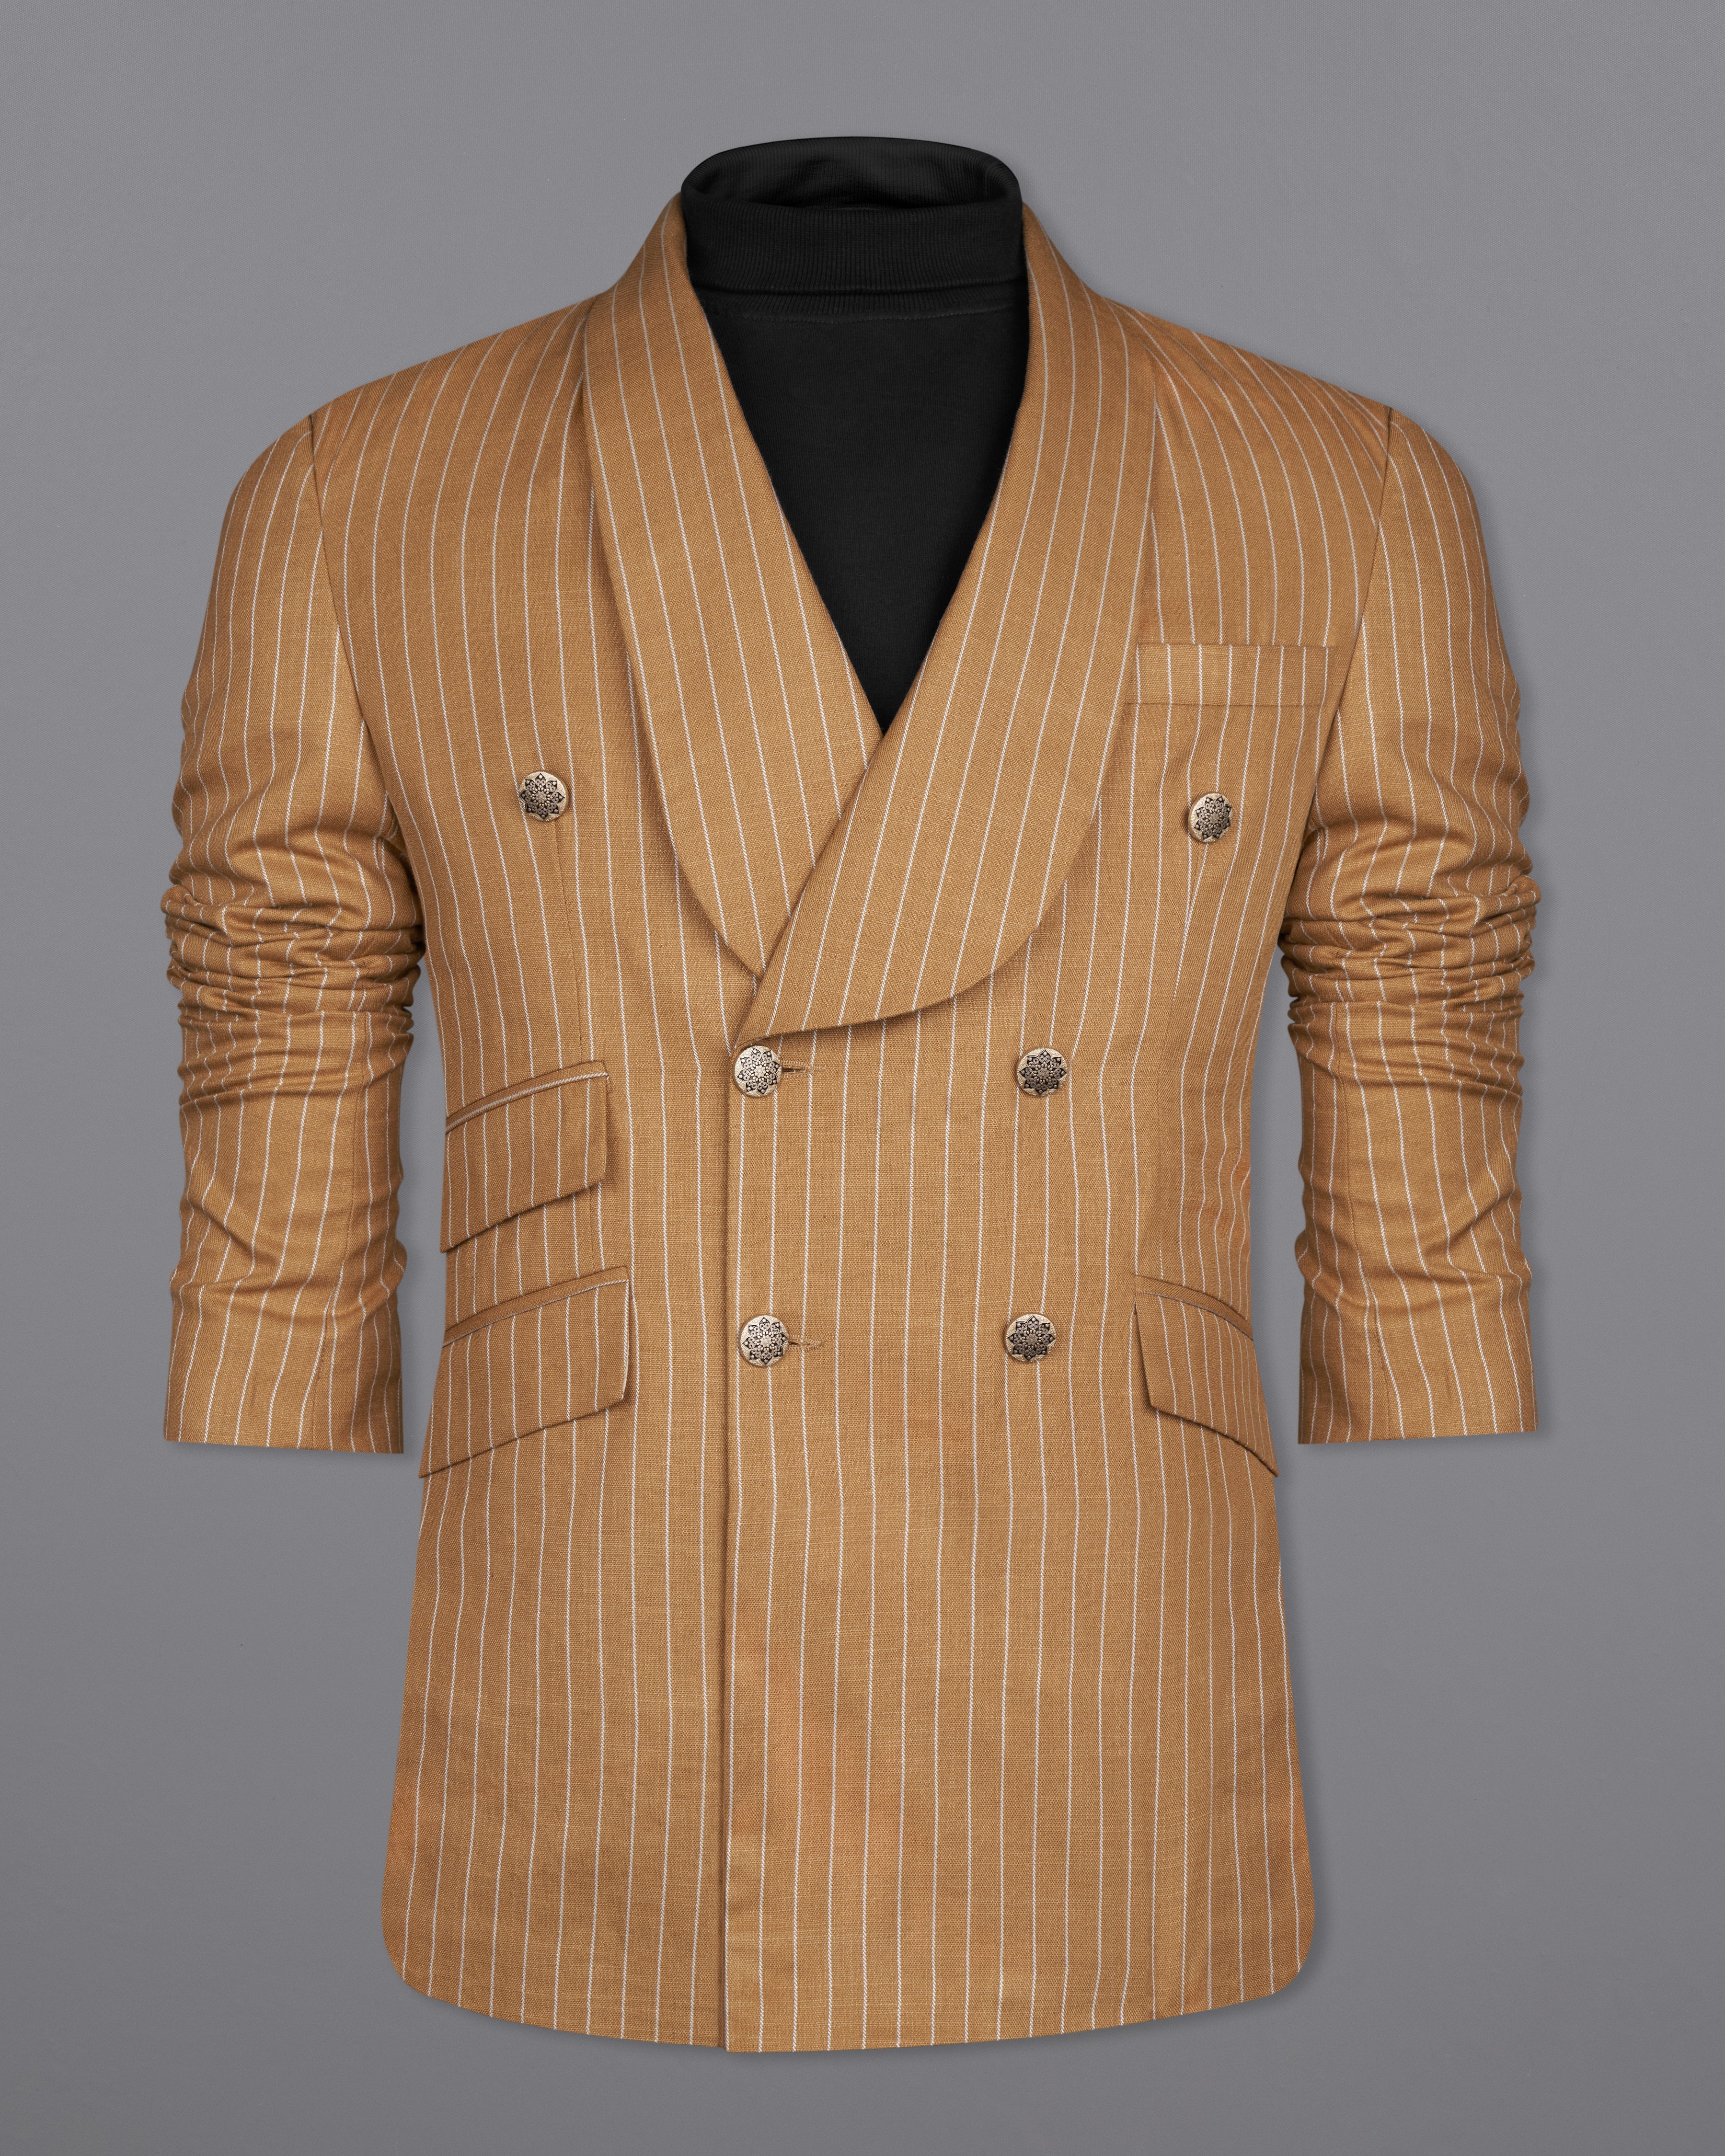 Clay Brown with White Striped Double Breasted Designer Blazer BL2615-DB-GB-D270-36, BL2615-DB-GB-D270-38, BL2615-DB-GB-D270-40, BL2615-DB-GB-D270-42, BL2615-DB-GB-D270-44, BL2615-DB-GB-D270-46, BL2615-DB-GB-D270-48, BL2615-DB-GB-D270-50, BL2615-DB-GB-D270-52, BL2615-DB-GB-D270-54, BL2615-DB-GB-D270-56, BL2615-DB-GB-D270-58, BL2615-DB-GB-D270-60